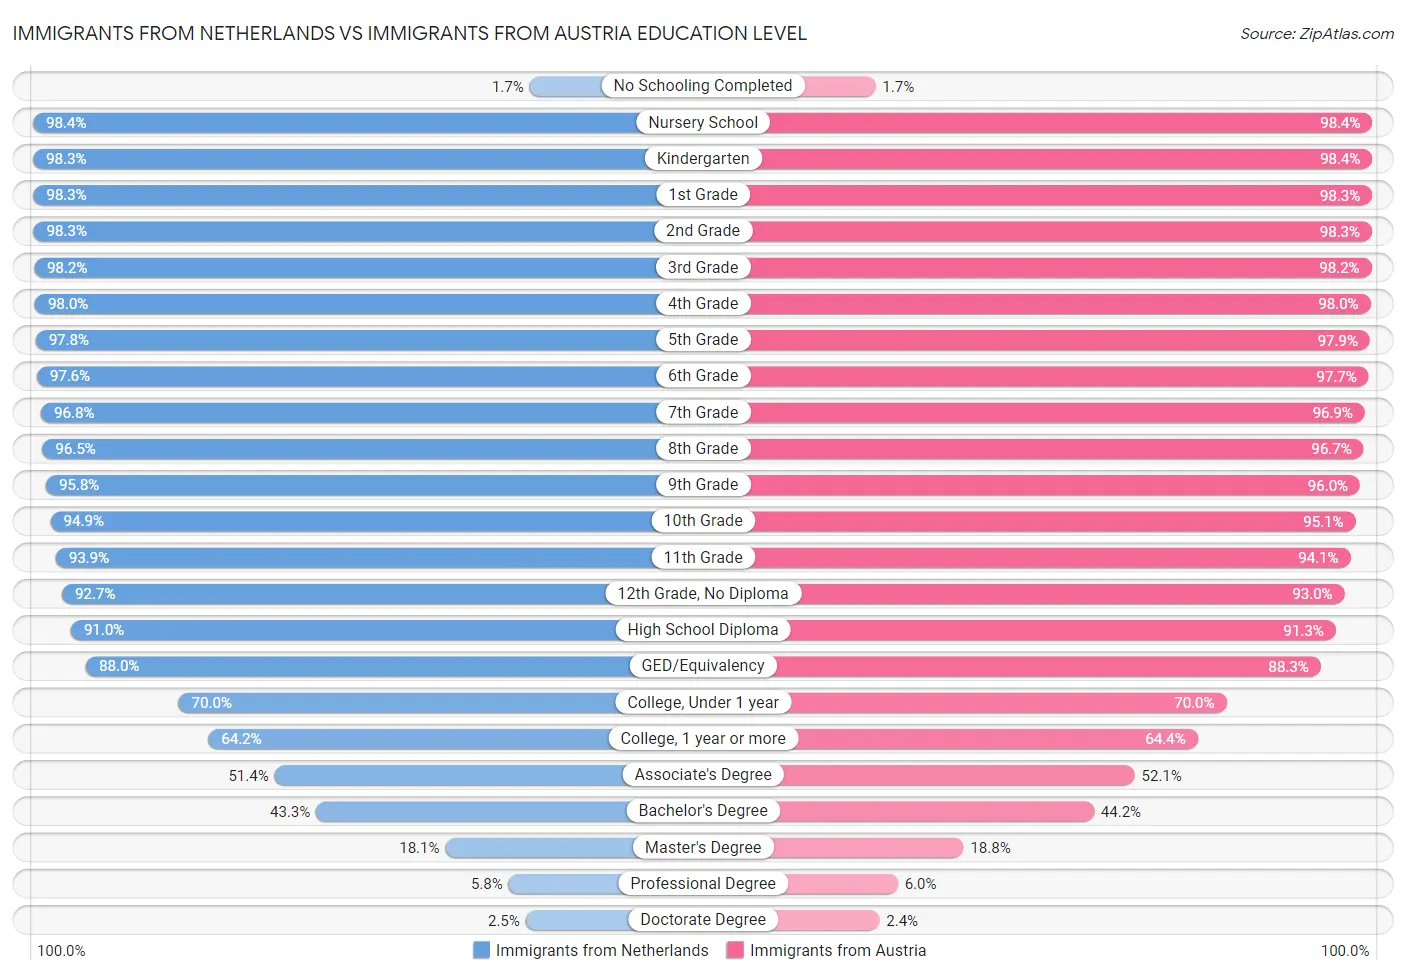 Immigrants from Netherlands vs Immigrants from Austria Education Level